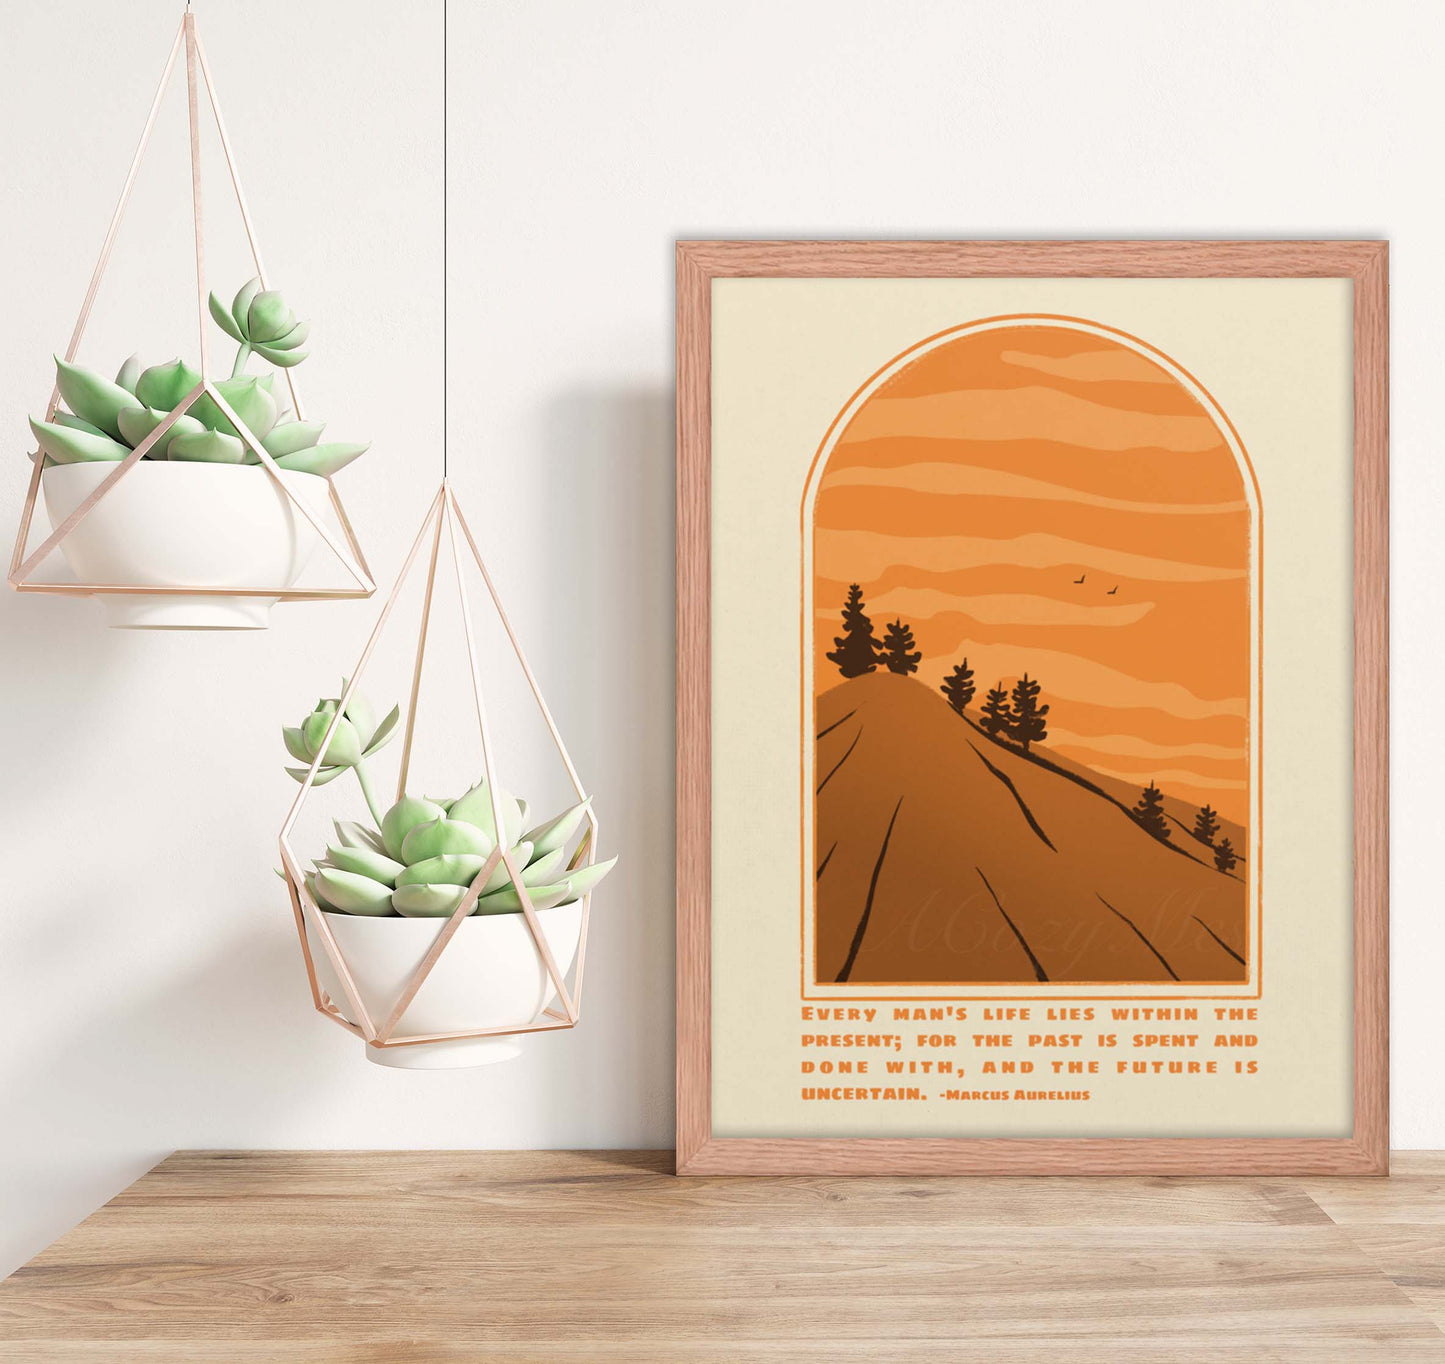 A tranquil landscape art poster framed in oak, featuring a road and trees set against an orange sky. It's accentuated with a Marcus Aurelius quote on living in the present, designed to inspire mindfulness and serenity in any space.